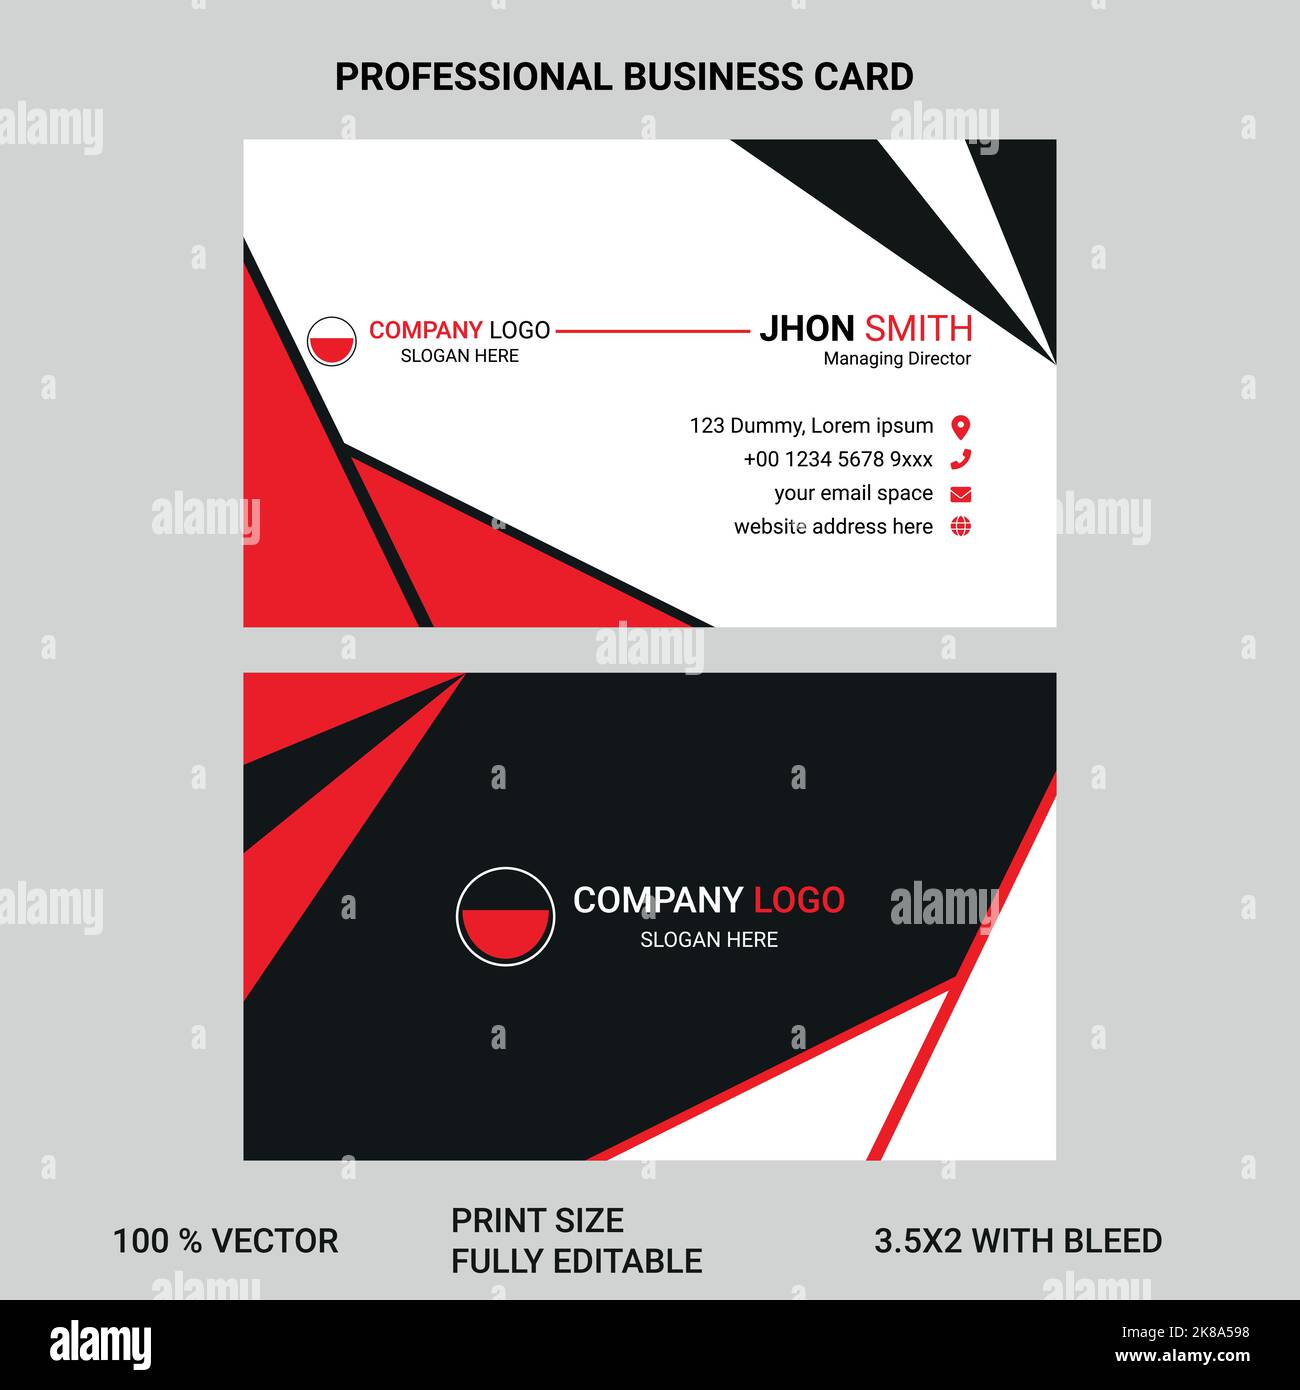 Professional business card with eye catching professional color for your business, company and personal usages Stock Vector